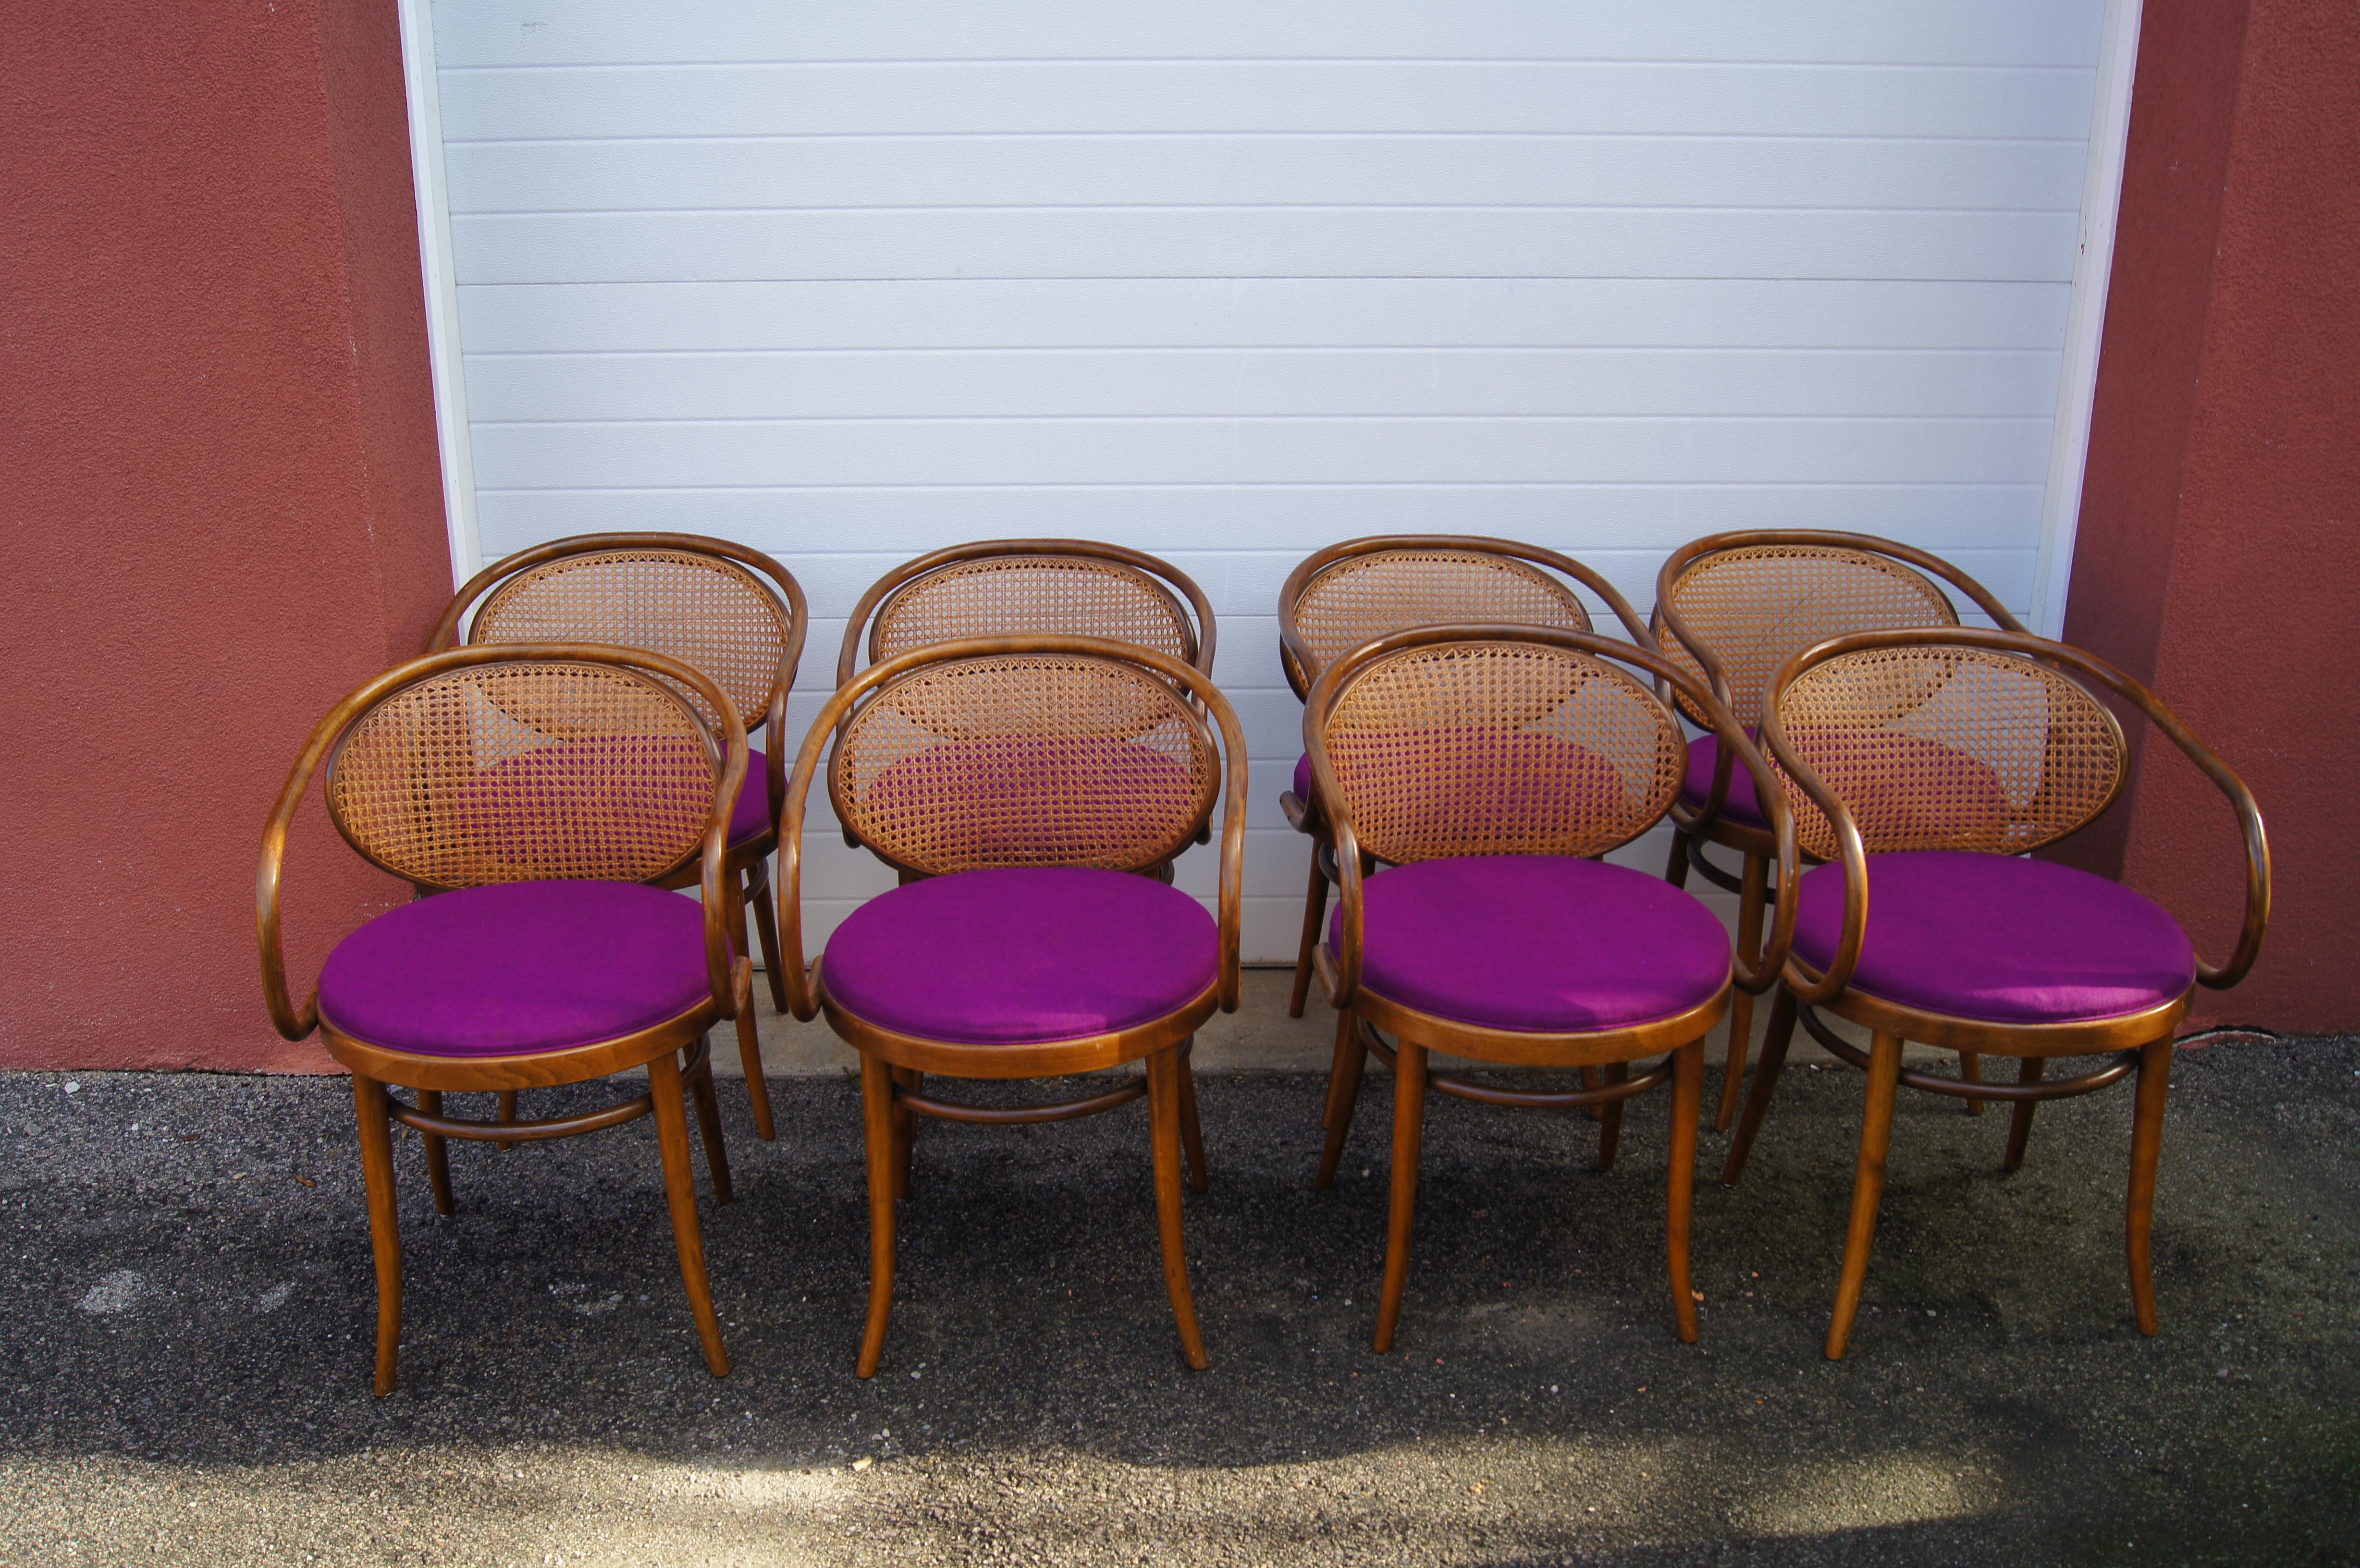 Made in Czechoslovakia, this set of eight 210 armchairs by Stendig features bentwood frames with a beautiful patina and handwoven cane backrests and seats.

A previous owner has added a vibrant violet textile to the seat.